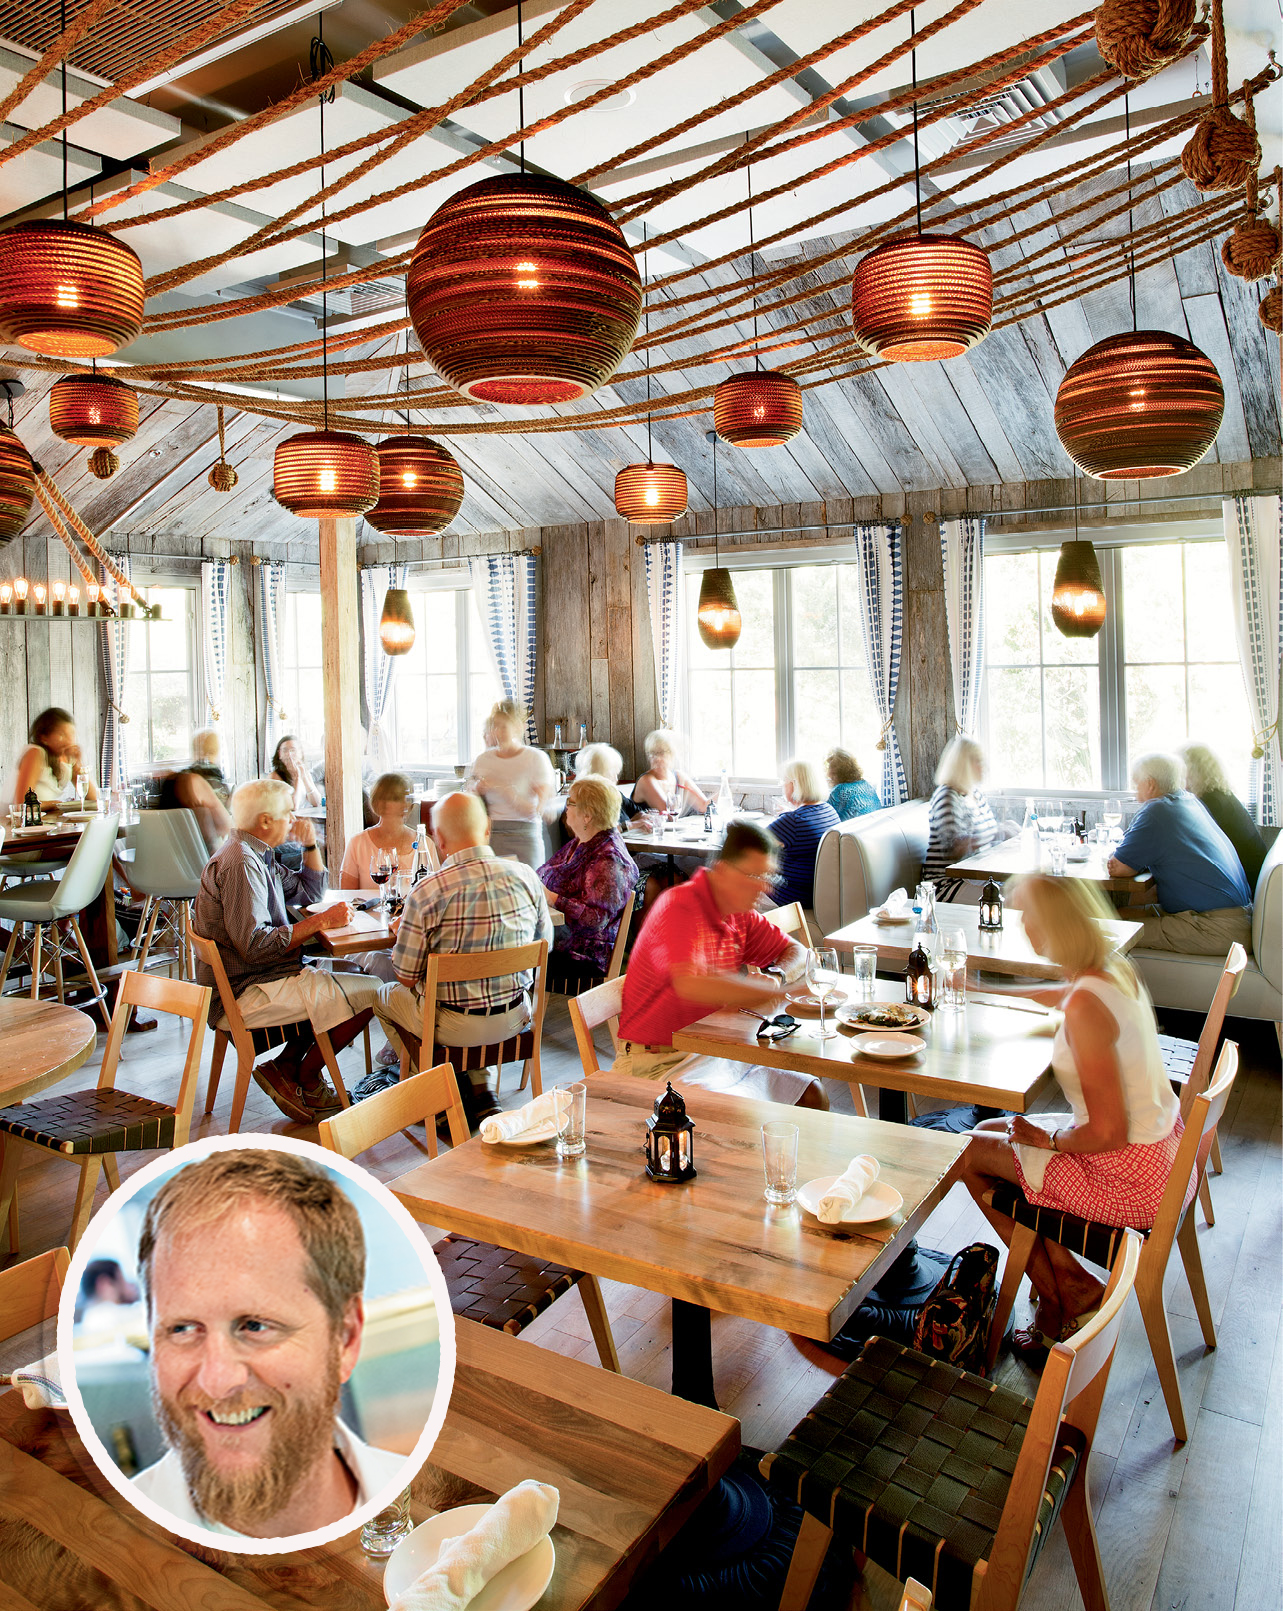 OFF THE PENINSULA: The Obstinate Daughter, where executive chef Jacques Larson (inset) and team serve up Mediterranean-Lowcountry dishes